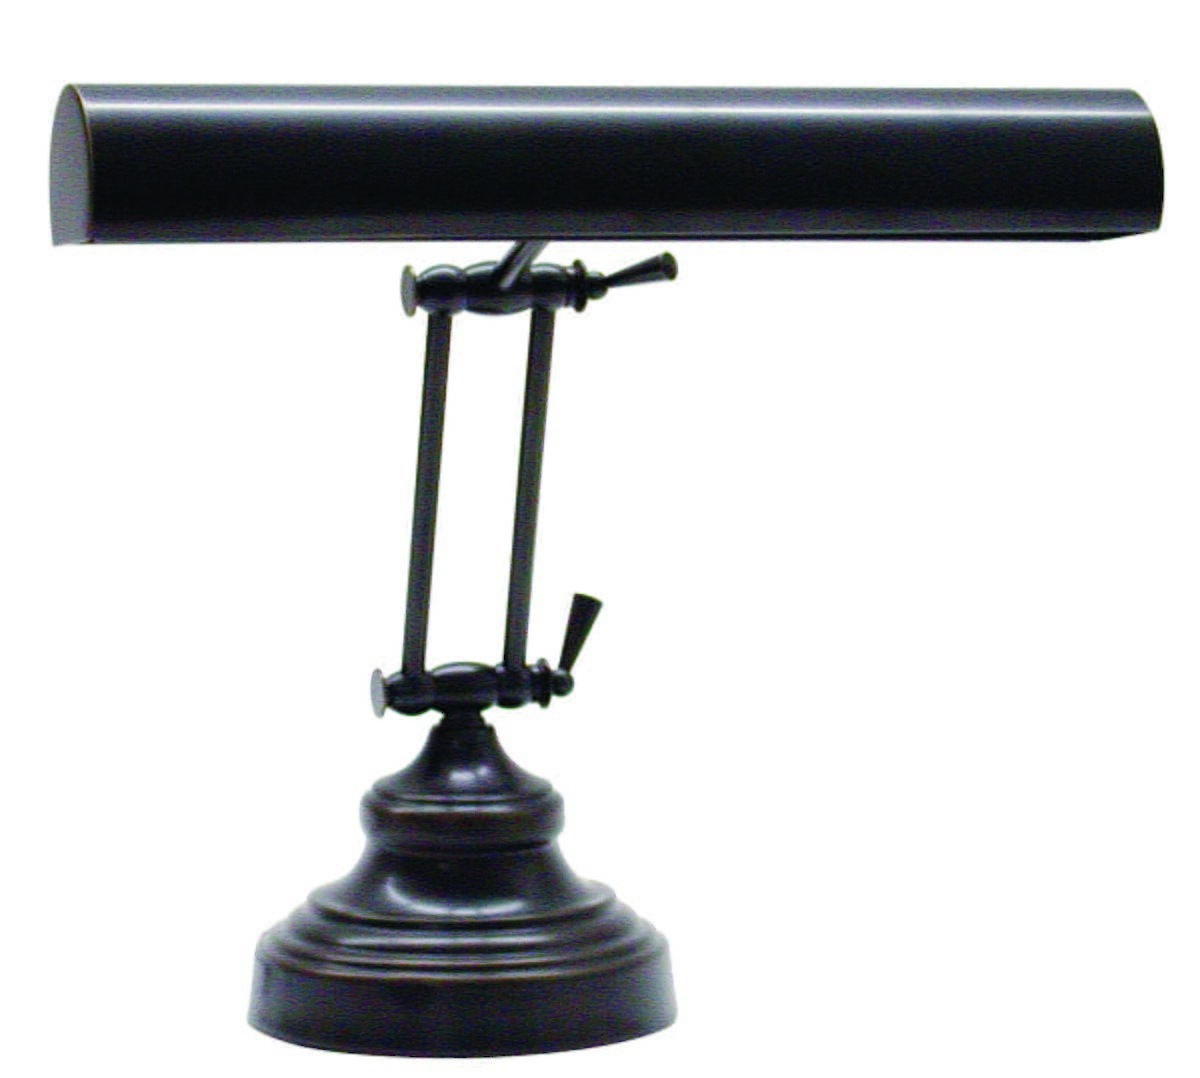 Advent 14"" Oil Rubbed Bronze Piano Desk Lamp -  House of Troy, AP14-41-91